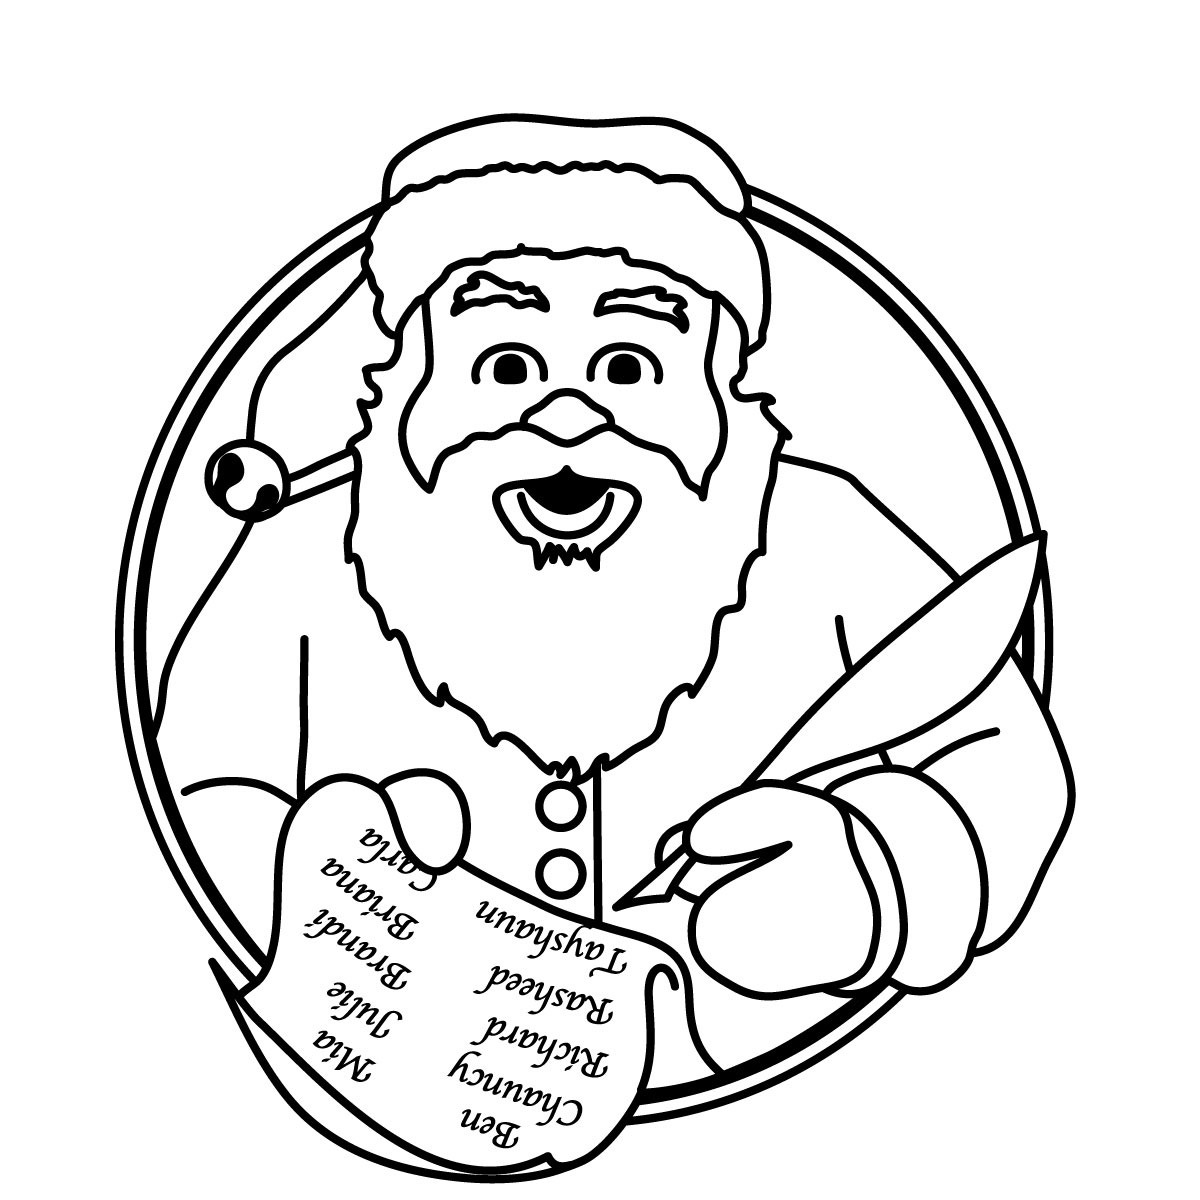 Black And White Pictures Of Santa Claus - ClipArt Best